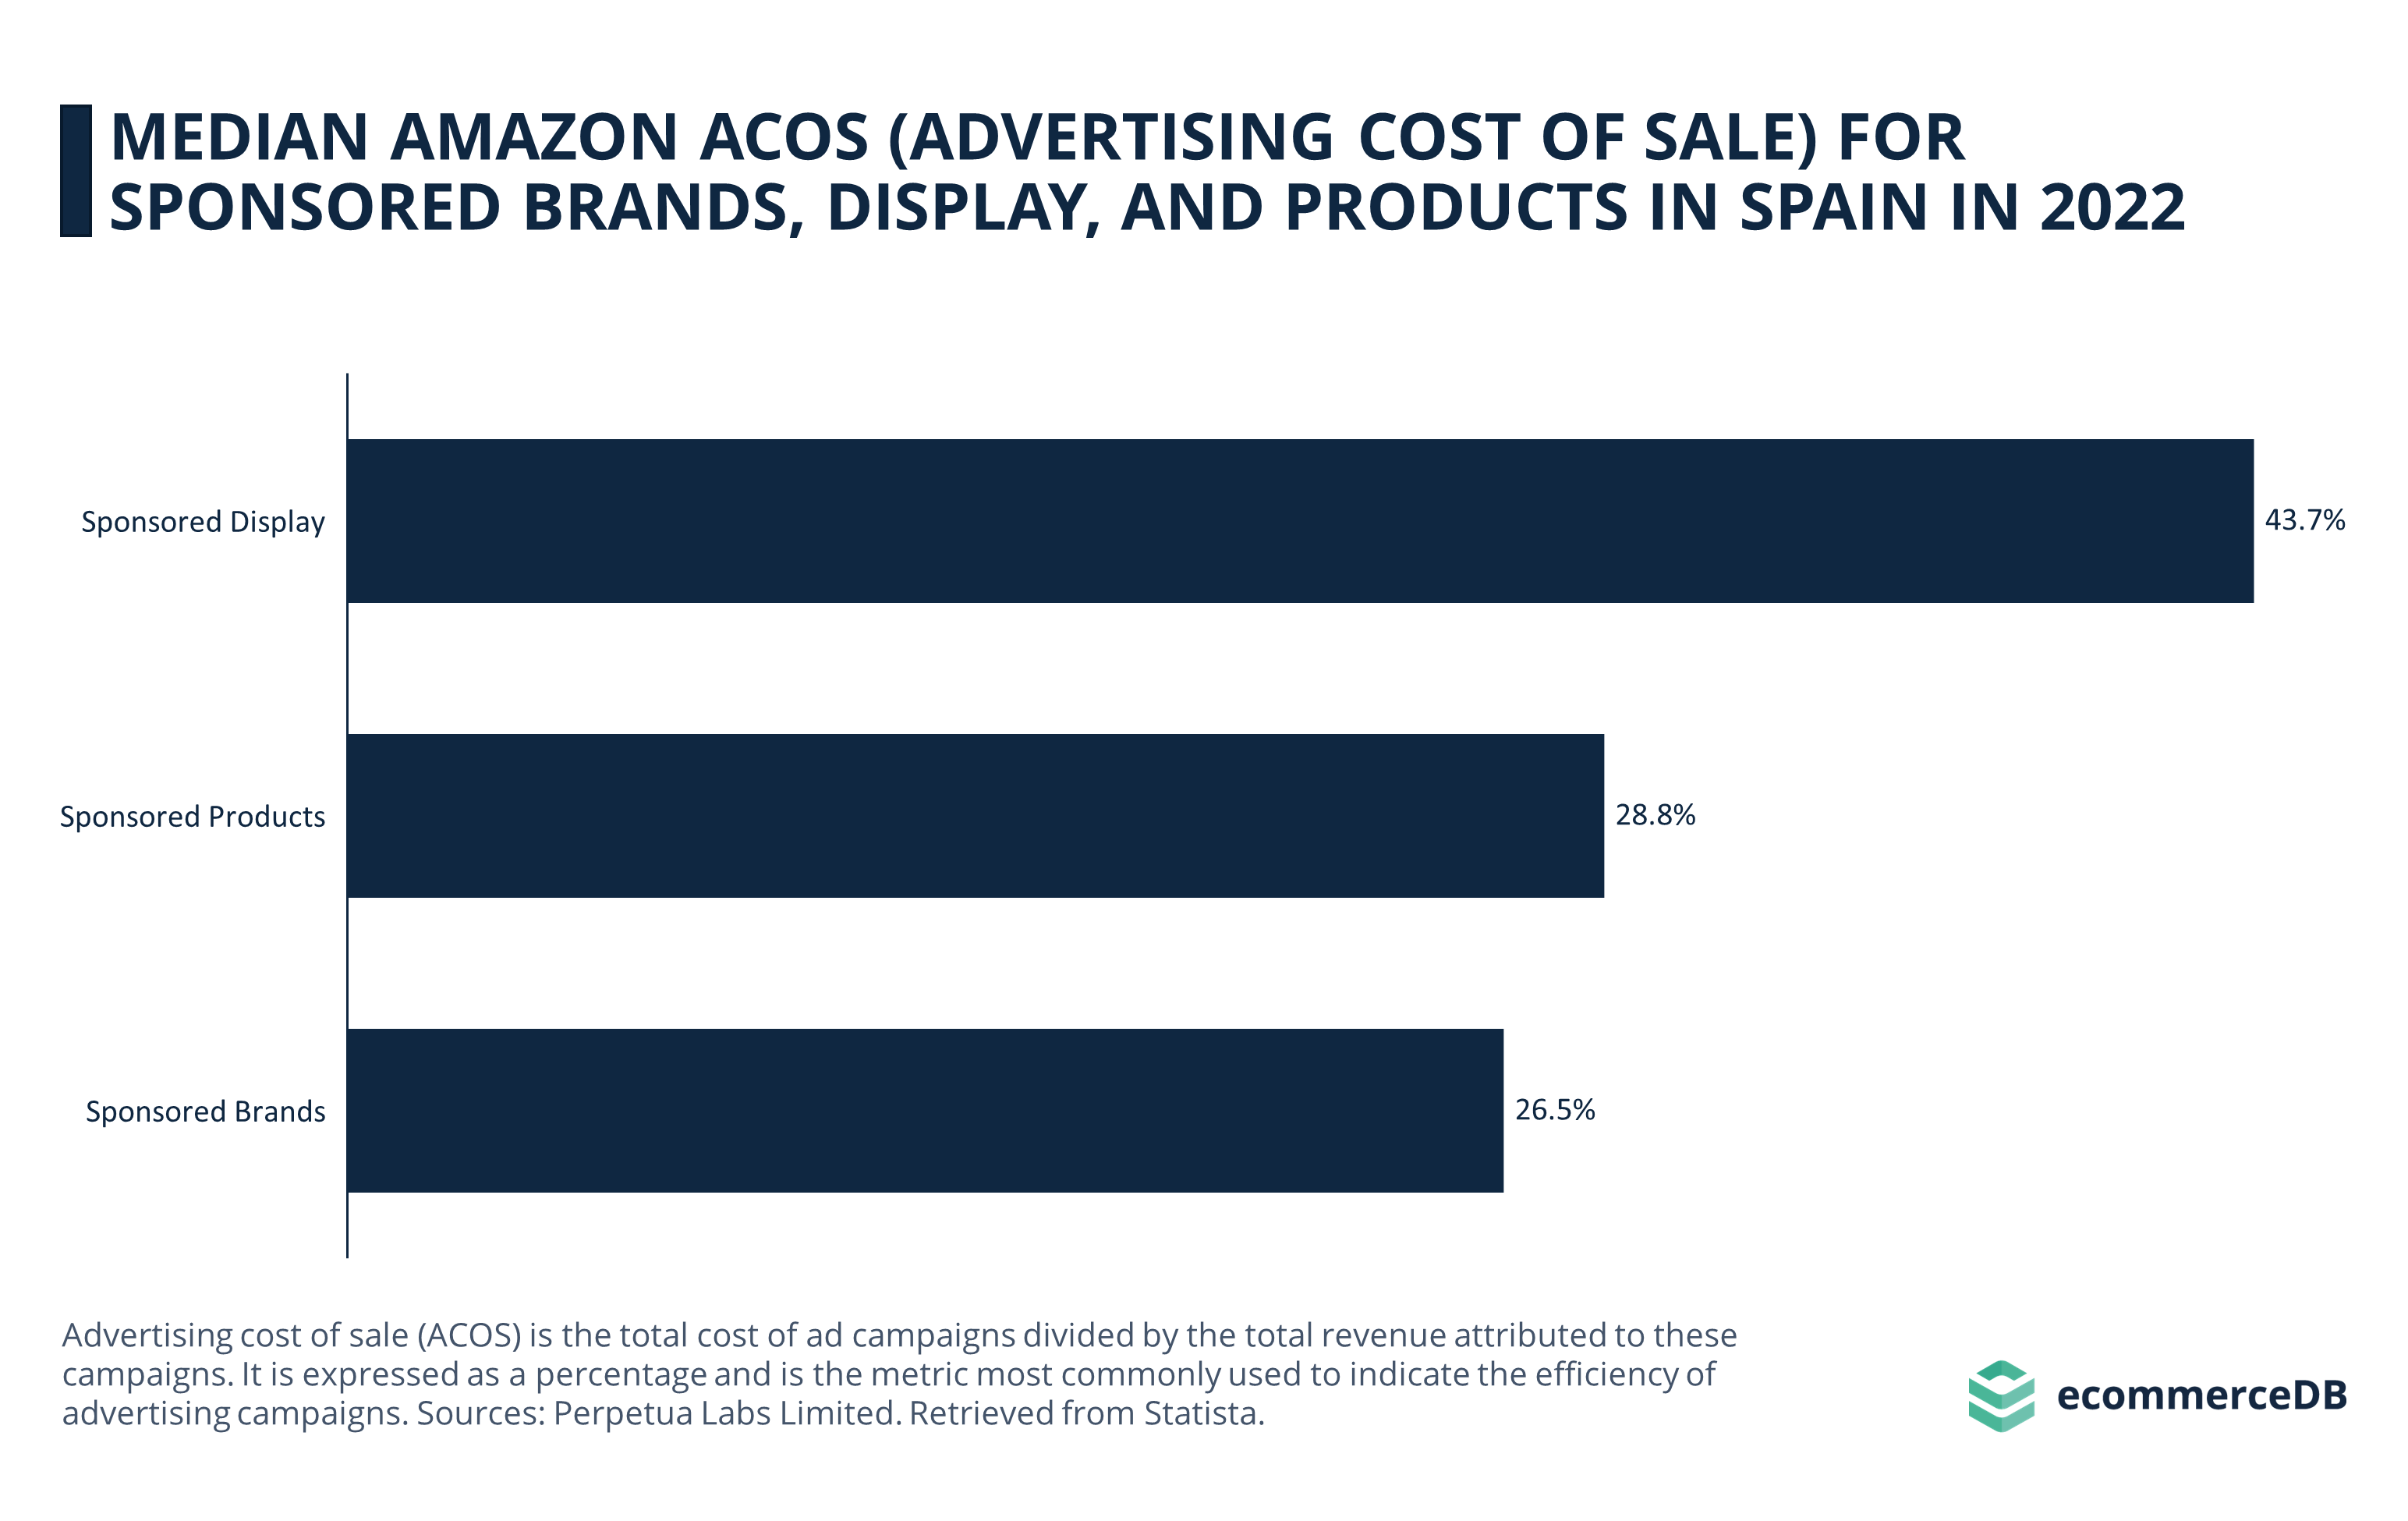 Median Amazon ACOS for 3 Ad Types in Spain